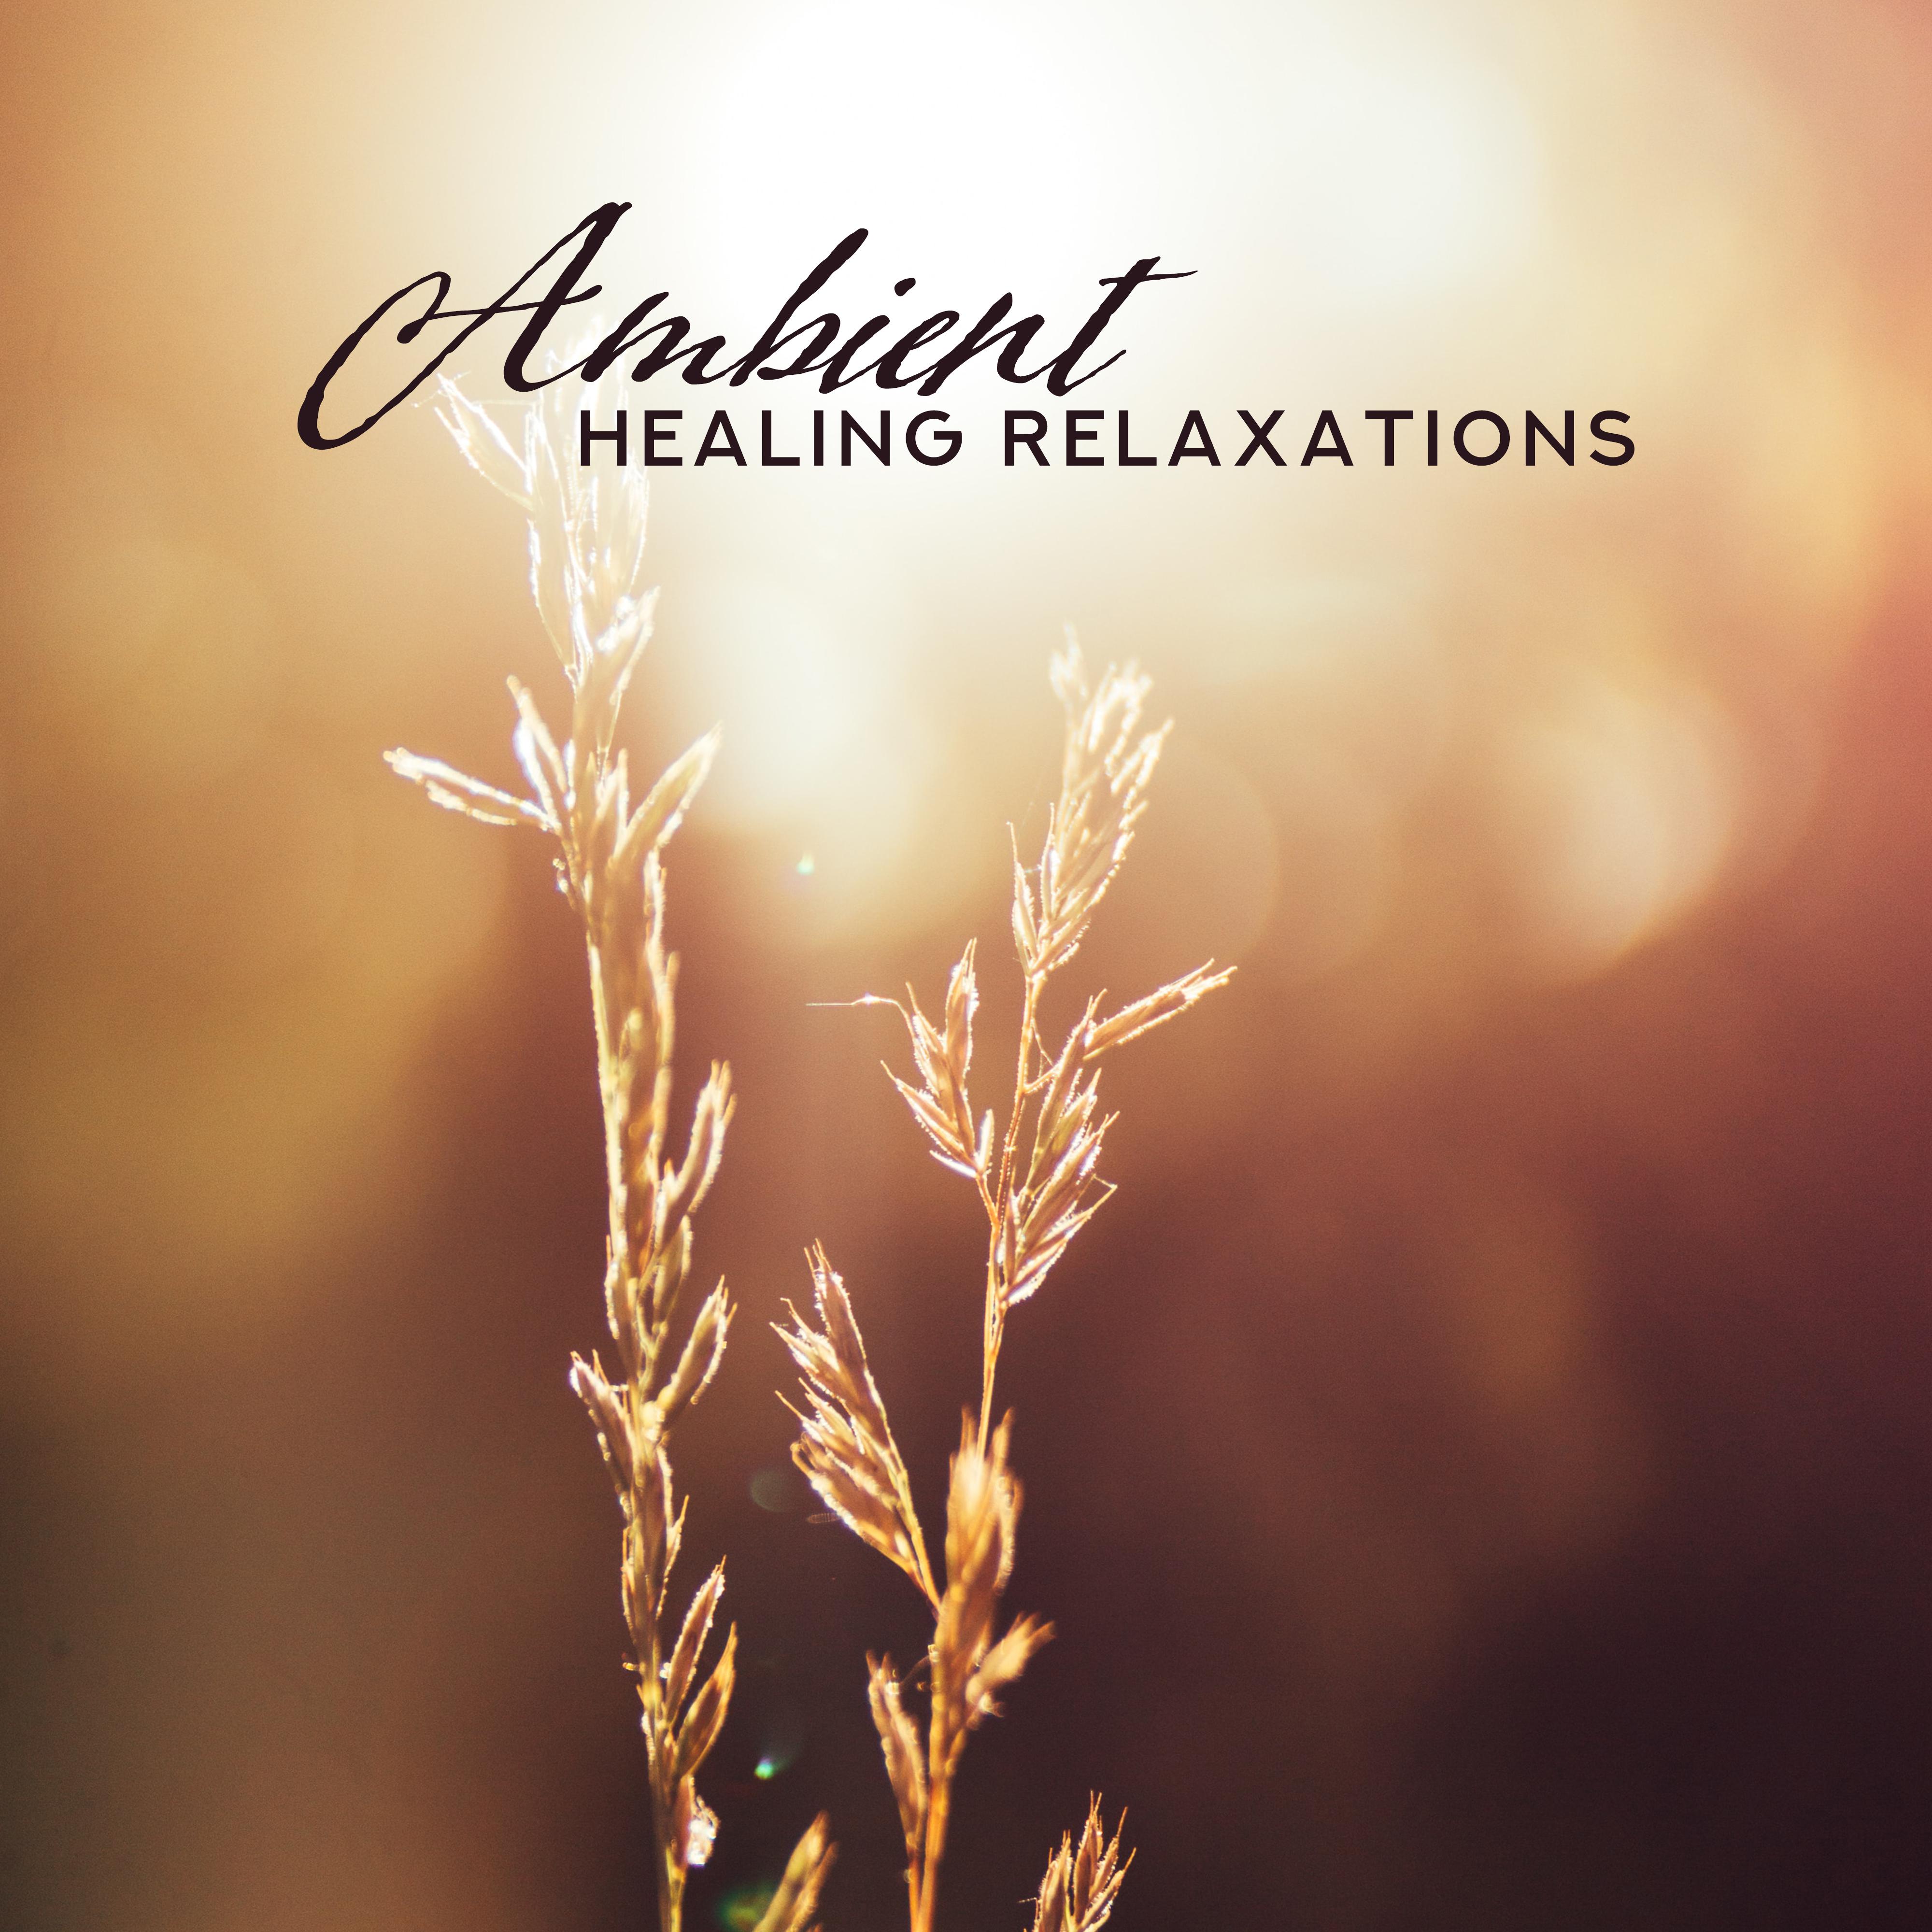 Ambient Healing Relaxations  Selection of Top 2019 New Age Deep Music for Relaxation  Meditation, Therapy Songs for Calm Down, Stress Free, Rest, Afternoon Nap